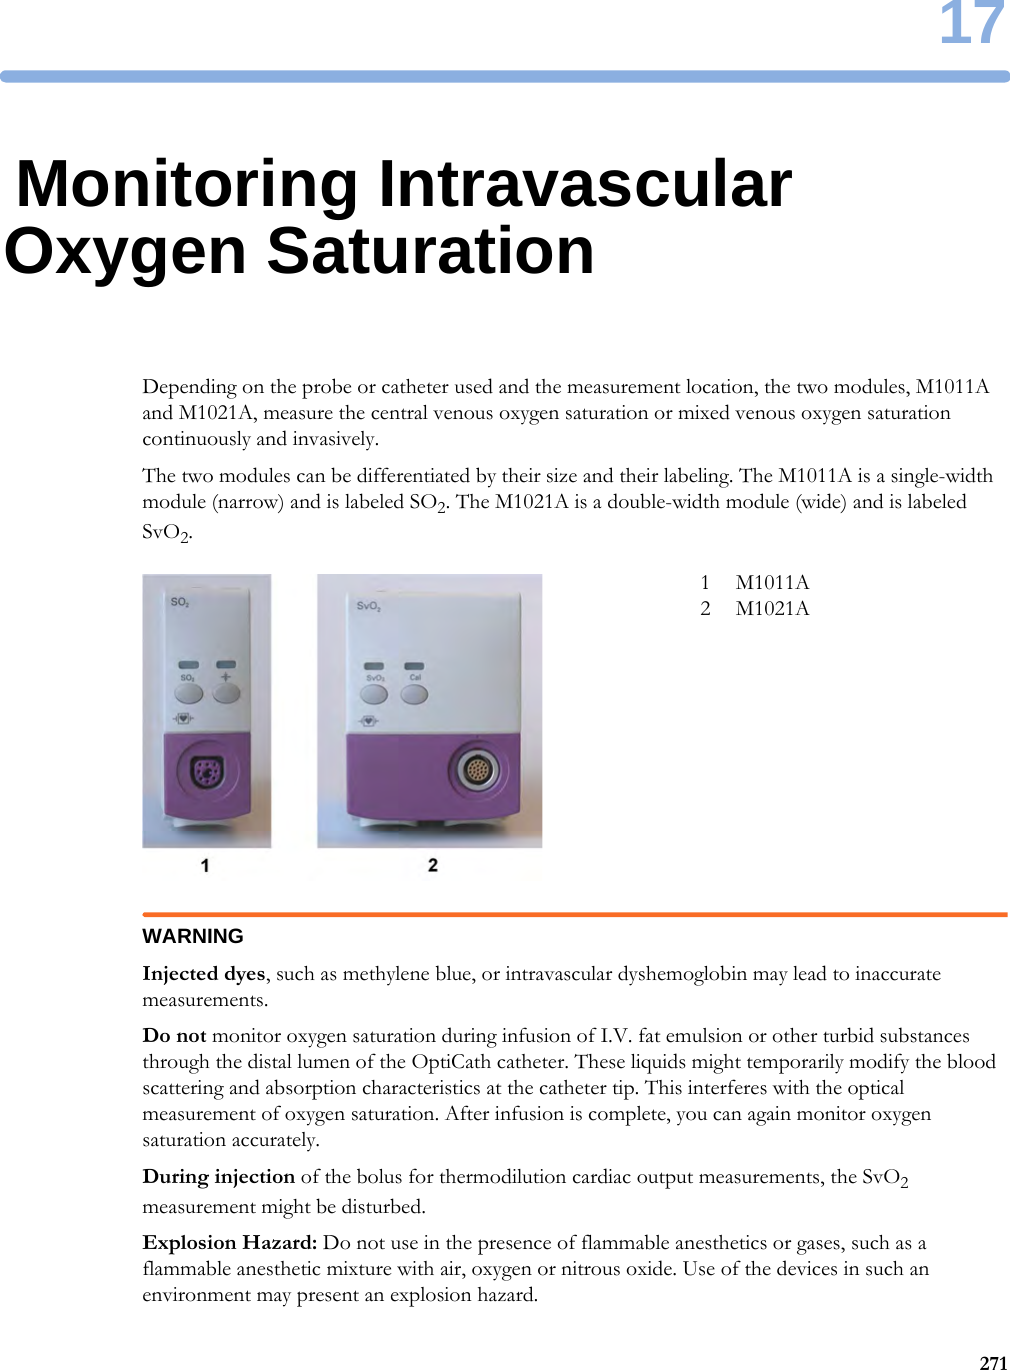 1727117Monitoring Intravascular Oxygen SaturationDepending on the probe or catheter used and the measurement location, the two modules, M1011A and M1021A, measure the central venous oxygen saturation or mixed venous oxygen saturation continuously and invasively.The two modules can be differentiated by their size and their labeling. The M1011A is a single-width module (narrow) and is labeled SO2. The M1021A is a double-width module (wide) and is labeled SvO2.WARNINGInjected dyes, such as methylene blue, or intravascular dyshemoglobin may lead to inaccurate measurements.Do not monitor oxygen saturation during infusion of I.V. fat emulsion or other turbid substances through the distal lumen of the OptiCath catheter. These liquids might temporarily modify the blood scattering and absorption characteristics at the catheter tip. This interferes with the optical measurement of oxygen saturation. After infusion is complete, you can again monitor oxygen saturation accurately.During injection of the bolus for thermodilution cardiac output measurements, the SvO2 measurement might be disturbed.Explosion Hazard: Do not use in the presence of flammable anesthetics or gases, such as a flammable anesthetic mixture with air, oxygen or nitrous oxide. Use of the devices in such an environment may present an explosion hazard.1 M1011A2 M1021A